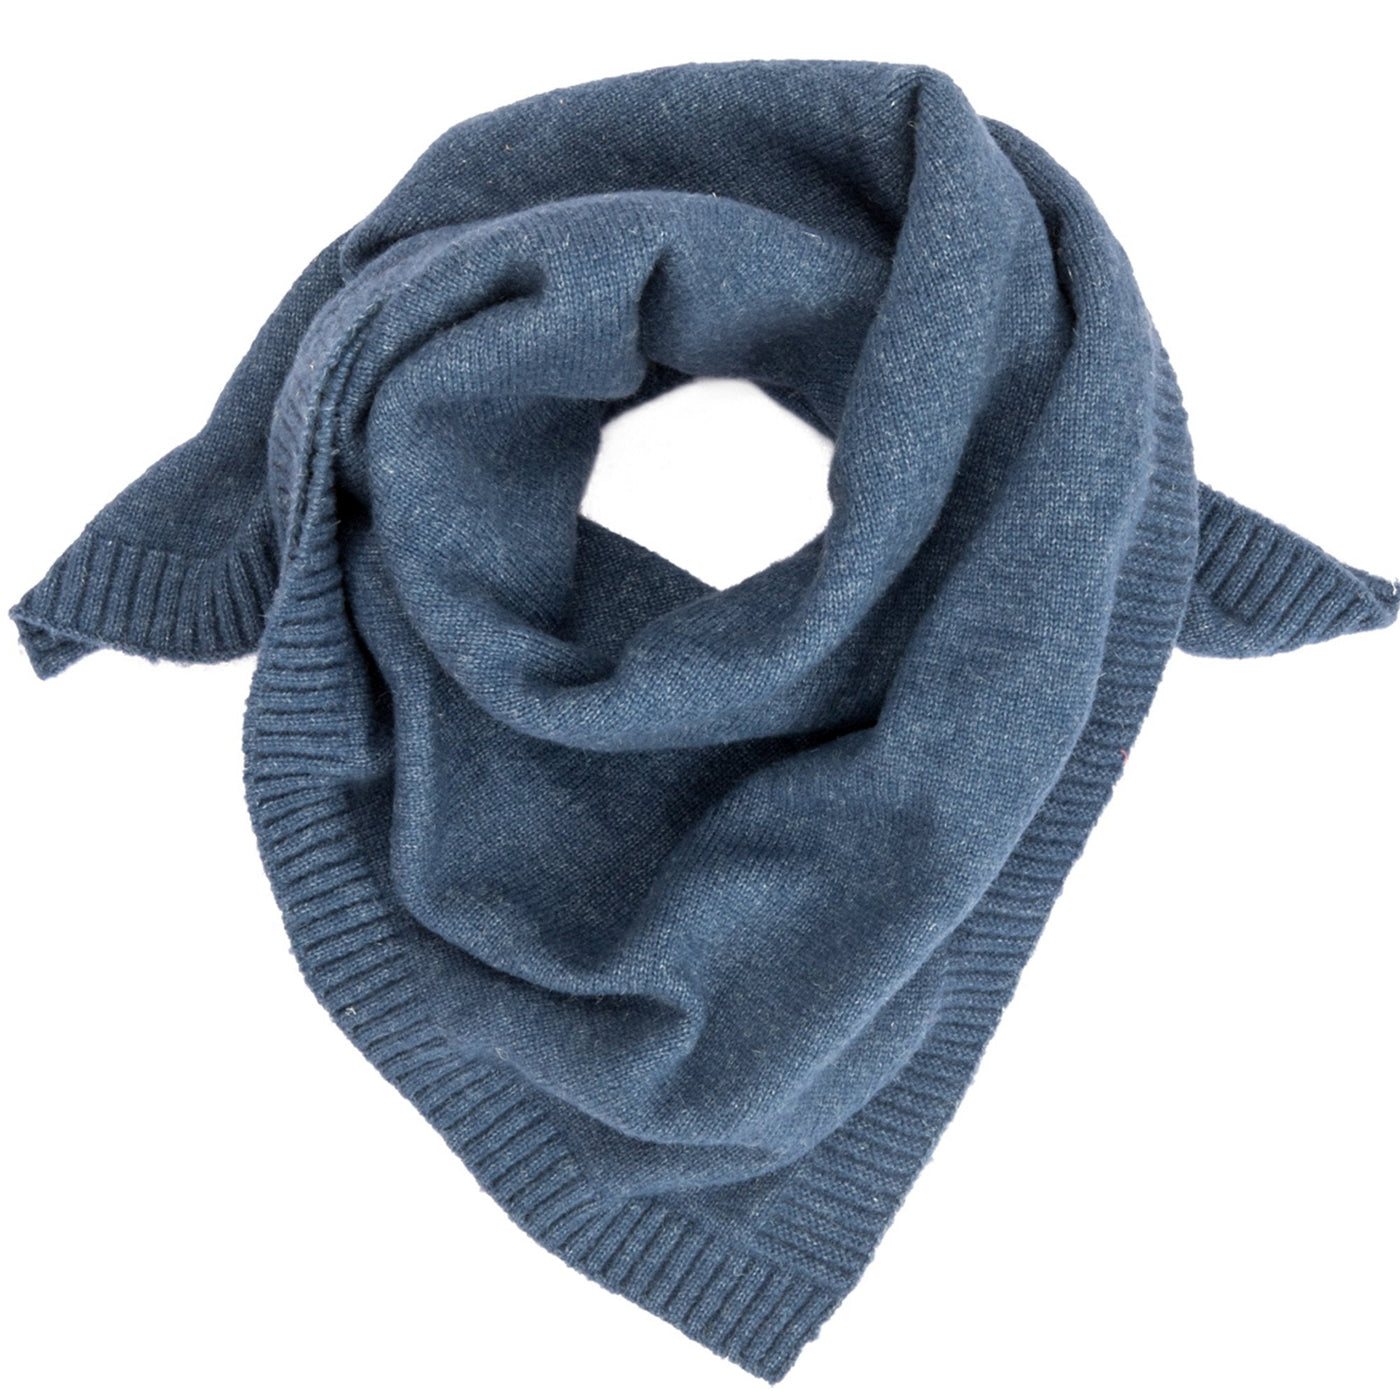 SCARF - Women's Oversized Knit Square Scarf